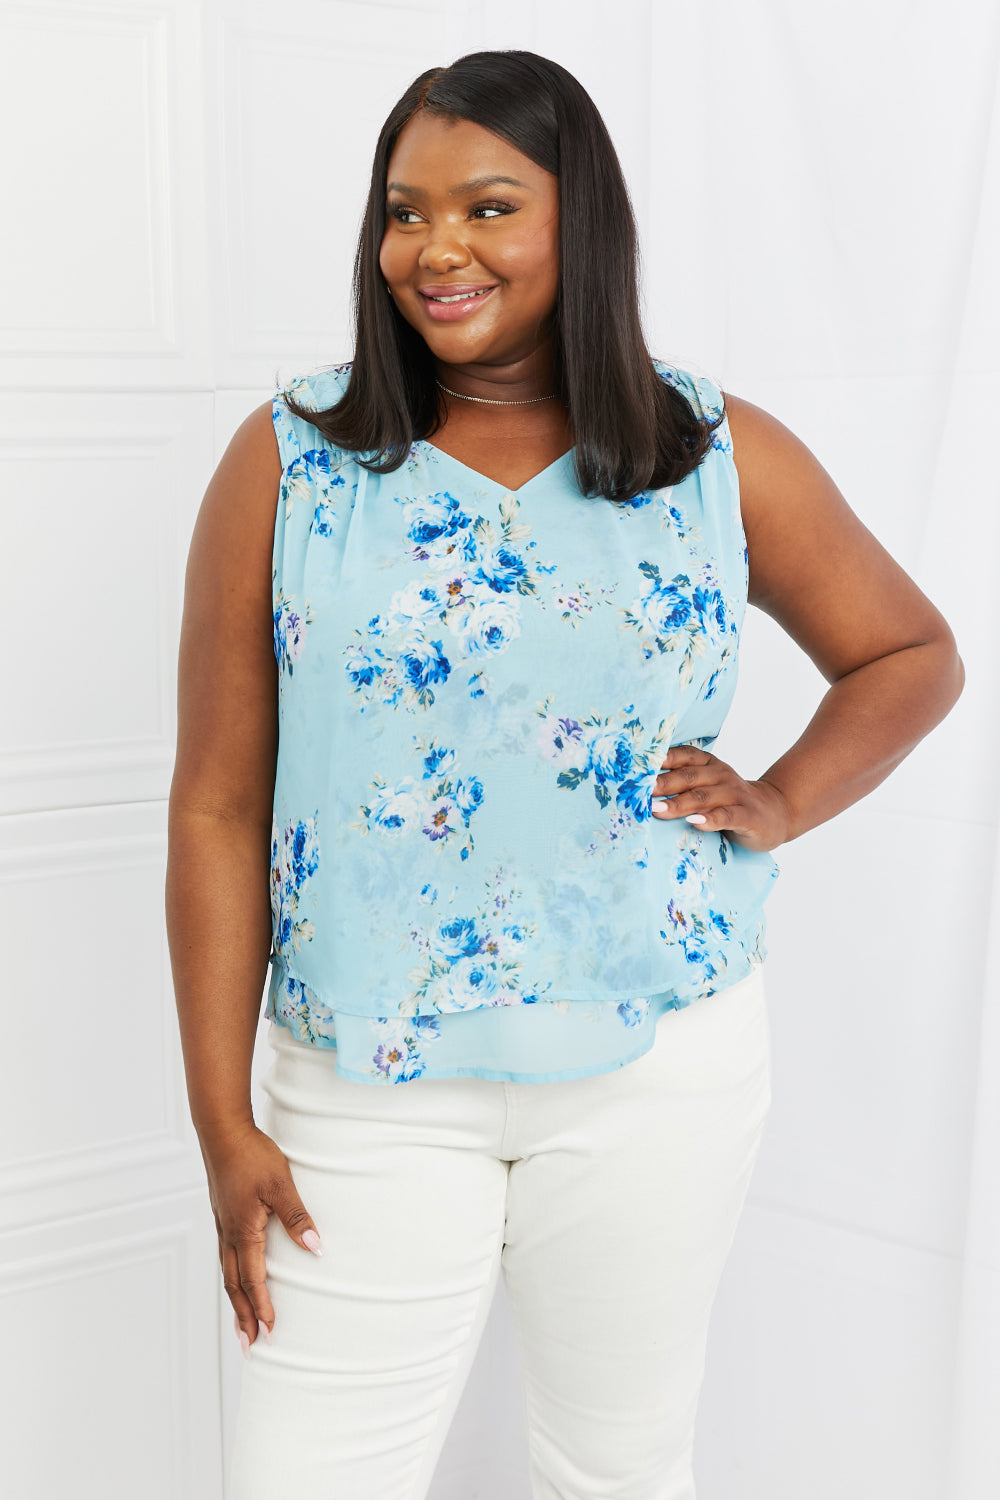 Sew In Love Off To Brunch Full Size Floral Tank Top - The Fashion Unicorn